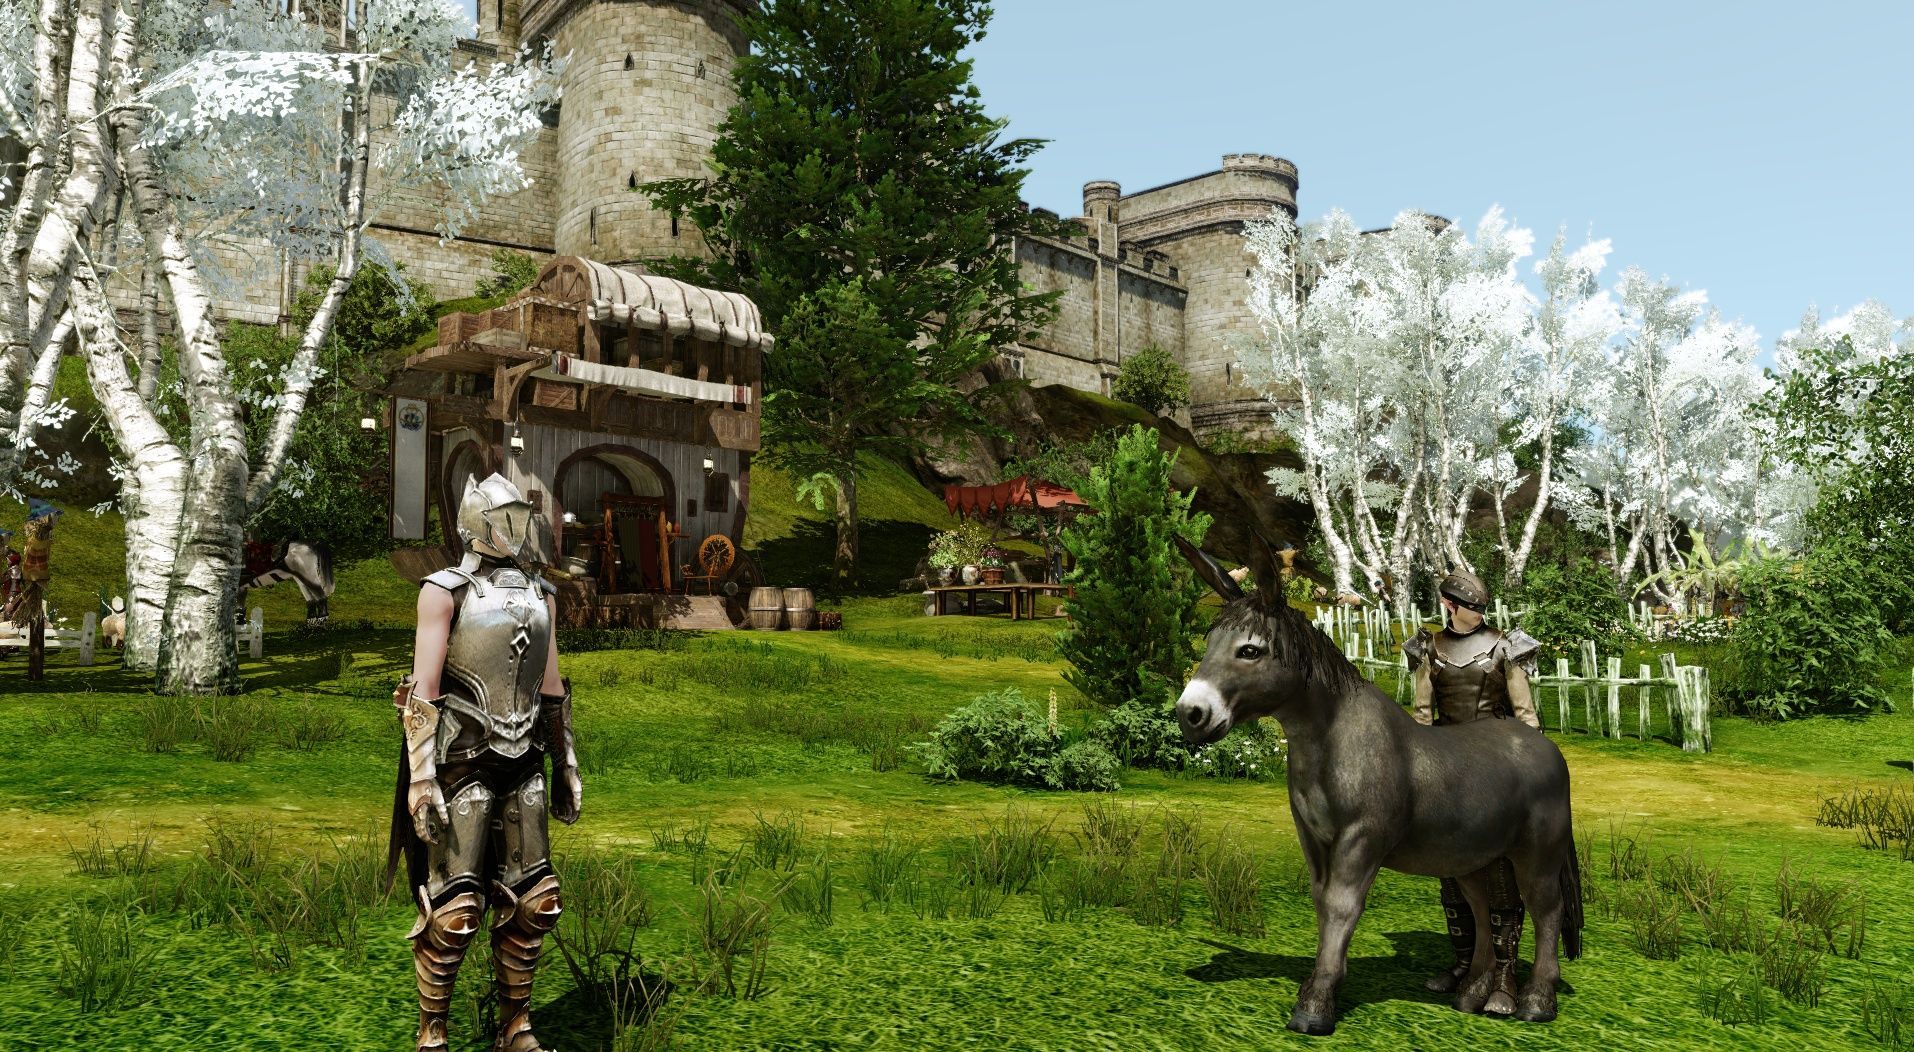 archeage games download free